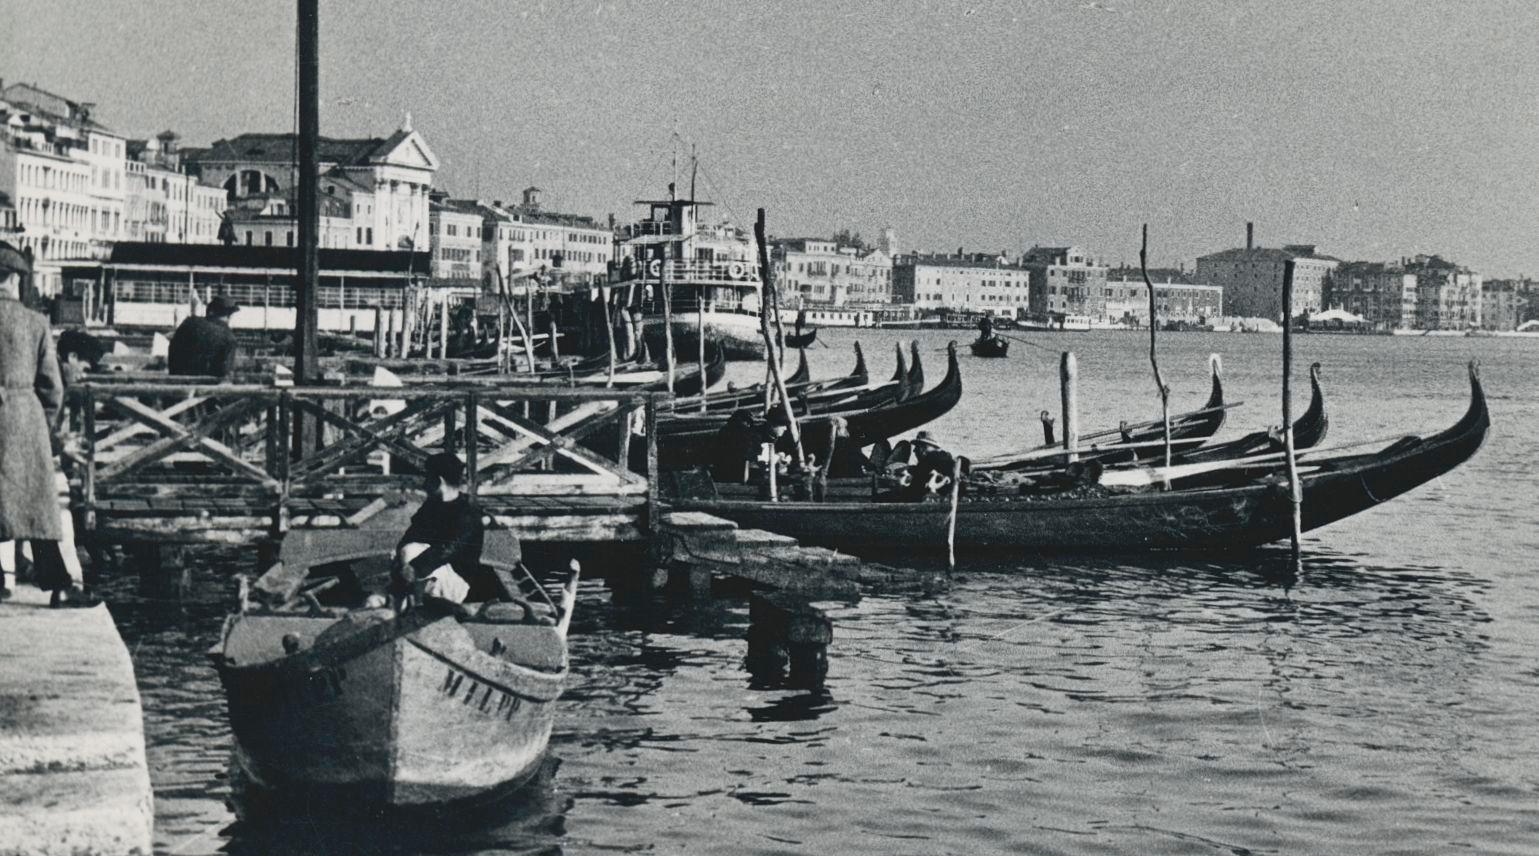 Venice, Waterfront, Gondolas, Black and White, Italy, 1950s, 13 x 17, 9 cm - Photograph by Erich Andres